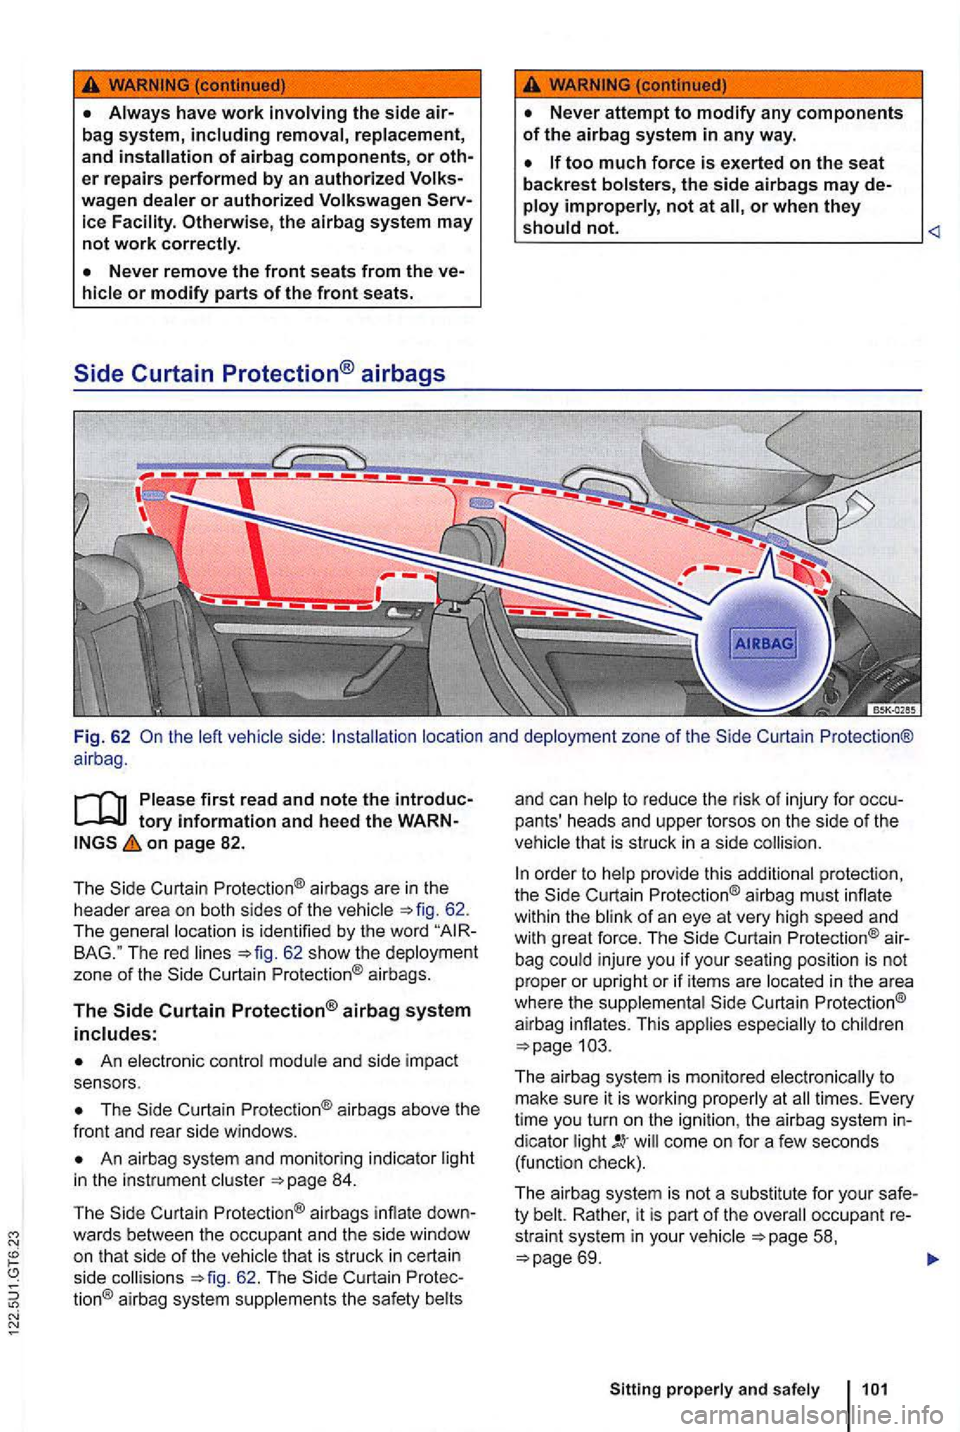 VOLKSWAGEN GOLF 2009  Owners Manual wagen dealer or authorized  Volkswagen the airbag  system  may not work correctly. 
on page 82. 
The Curt ain  Protection ® airbags  are in  the 
header  area on both  sides of the vehicle 62. 
The  